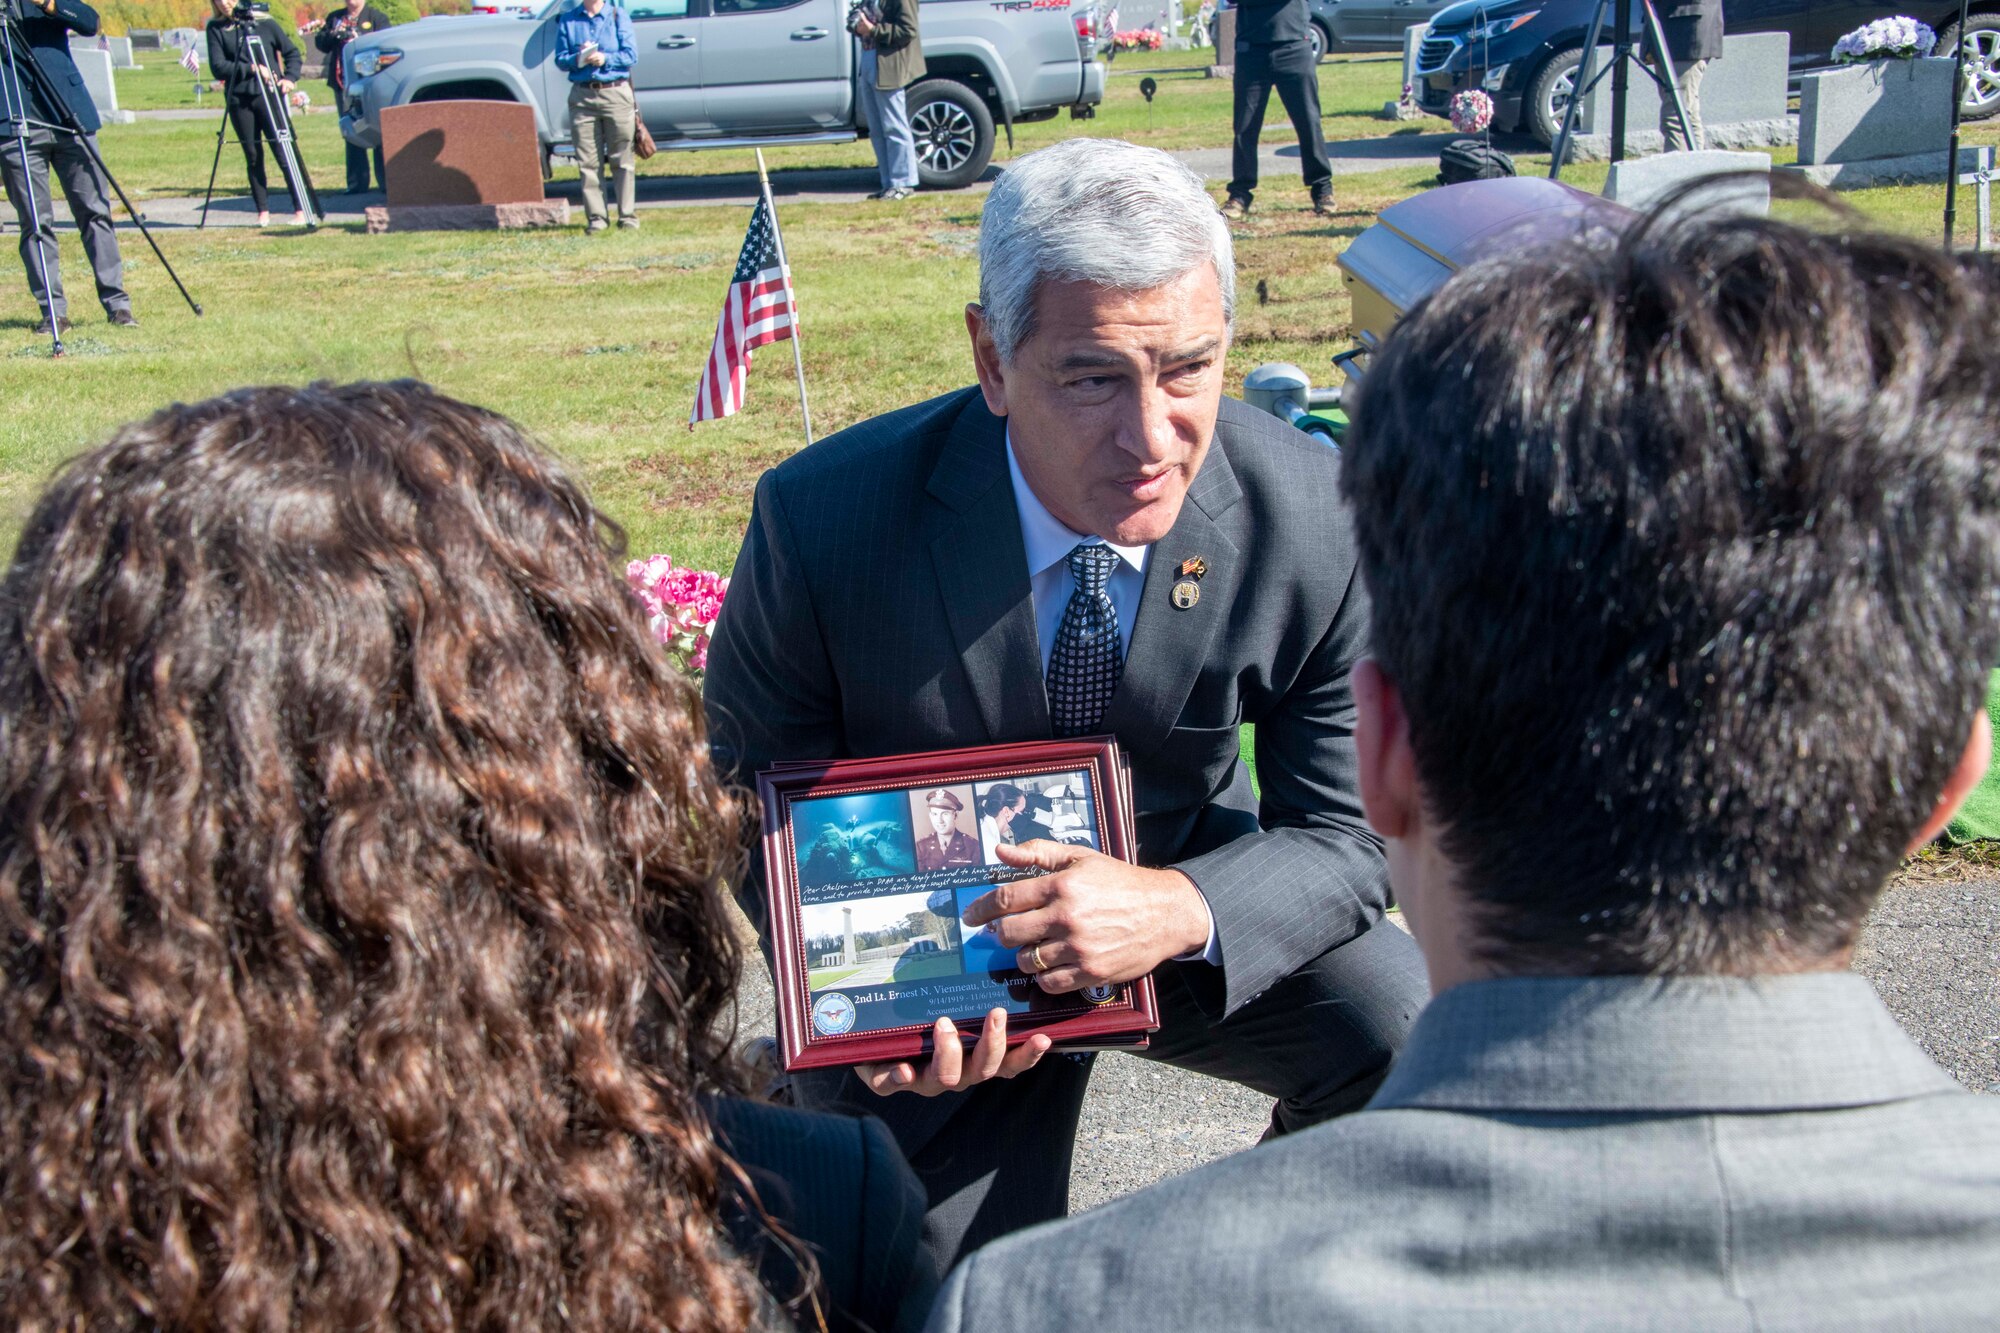 Kelly McKeague, Defense POW/MIA Accounting Agency (DPAA) director, presents a plaque from his agency to the family of U.S. Army Air Forces 2nd Lt. Earnest Vienneau, 97th Bombardment Group, during Vienneau’s funeral at Millinocket, Maine, Oct. 9, 2021. The DPAA vision is to provide a world-class workforce that fulfills the nation’s obligation by maximizing the number of missing personnel accounted for while ensuring timely, accurate information is provided to their families. (U.S. Air Force photo by Staff Sgt. Cody Dowell)